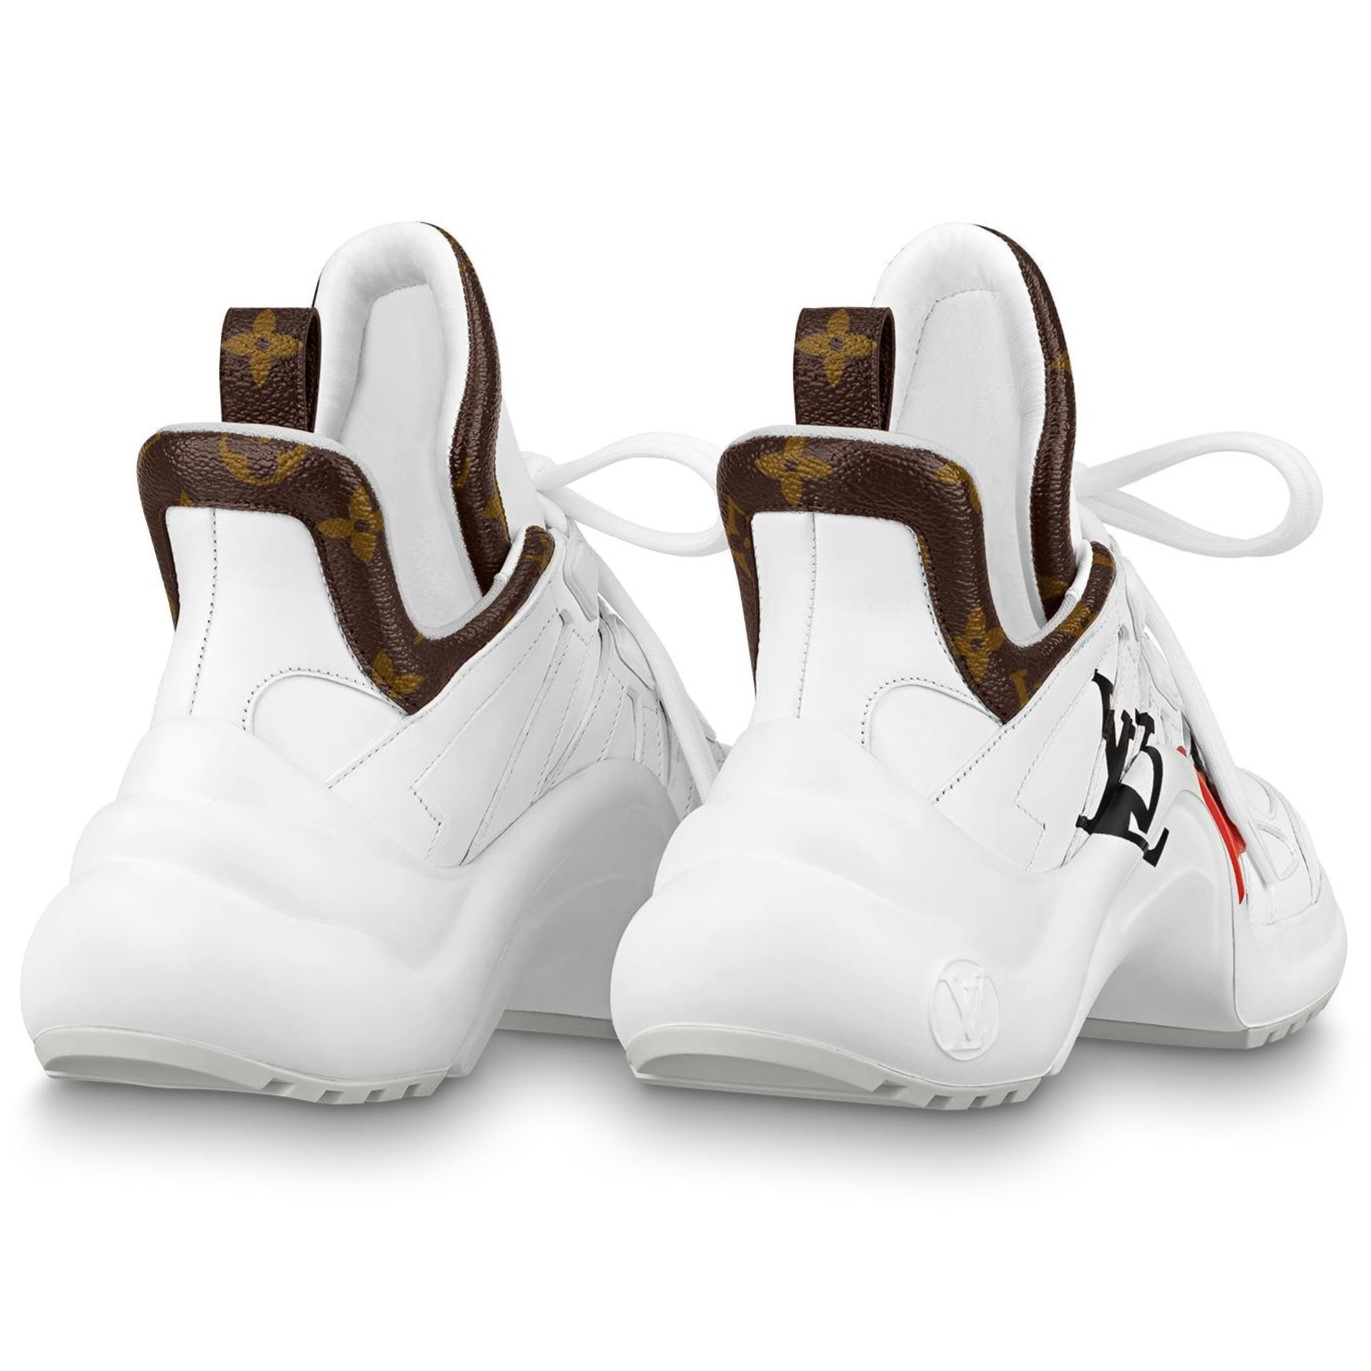 GIÀY THỂ THAO ĐẾ CONG LV NỮ LOUIS VUITTON GAME ON LV ARCHLIGHT SNEAKER IN WHITE 1A8MRP 6